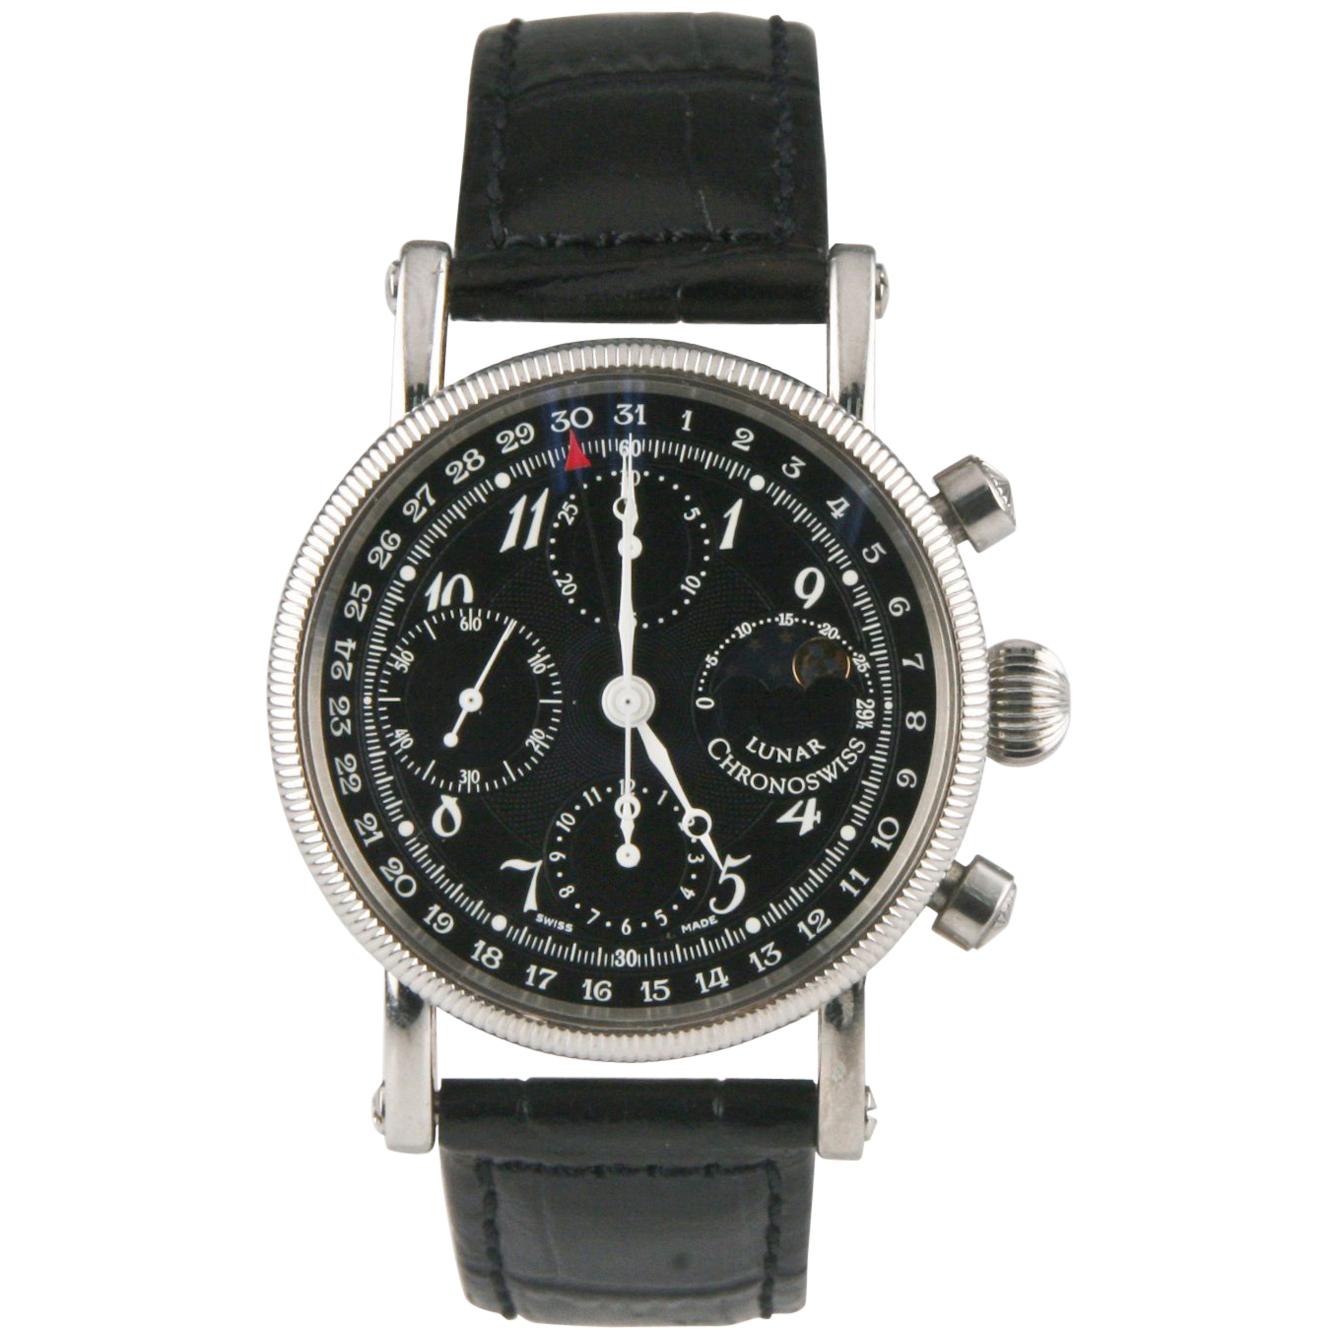 Chronoswiss Lunar Chronograph Stainless Steel Men's Watch Leather Band